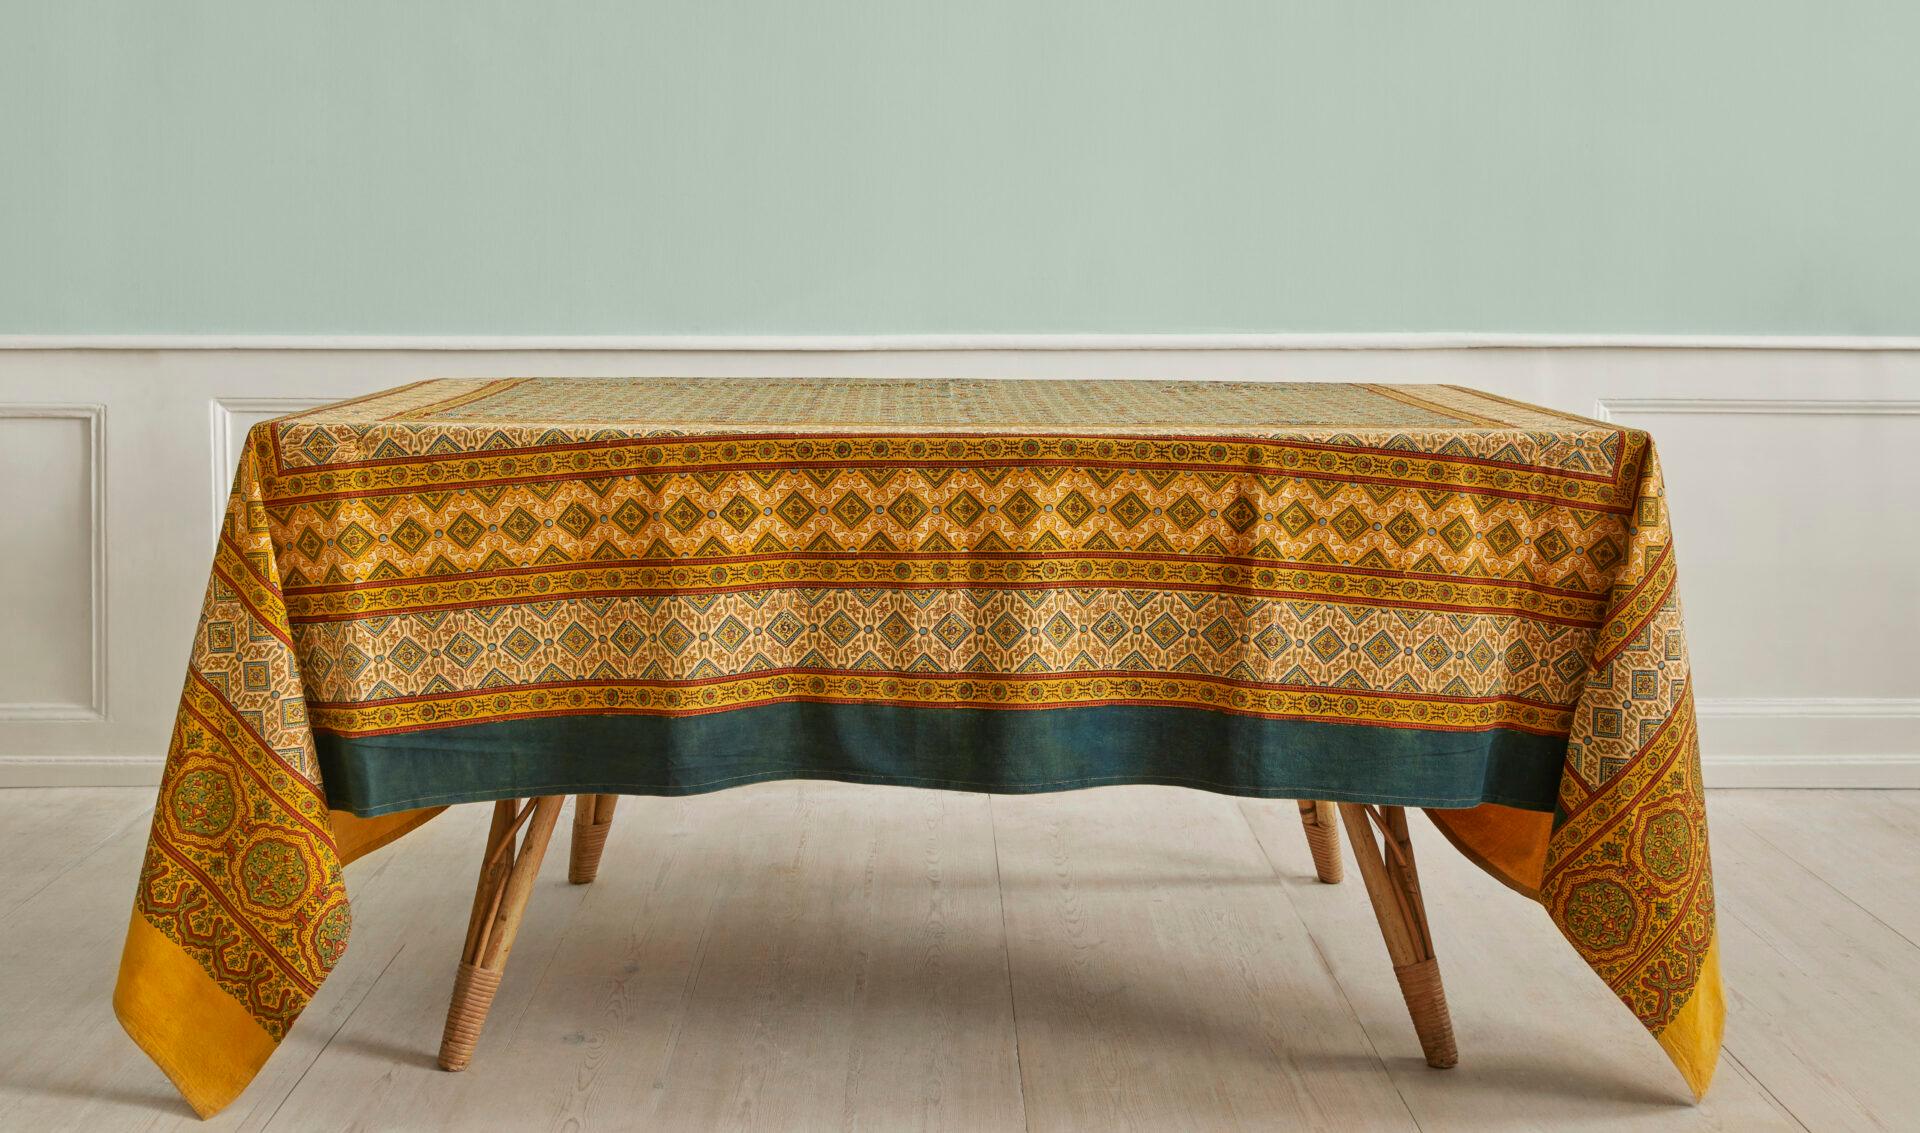 India, Contemporary

Handblock printed natural dyed cotton tablecloth.

H 273 x W 226 cm